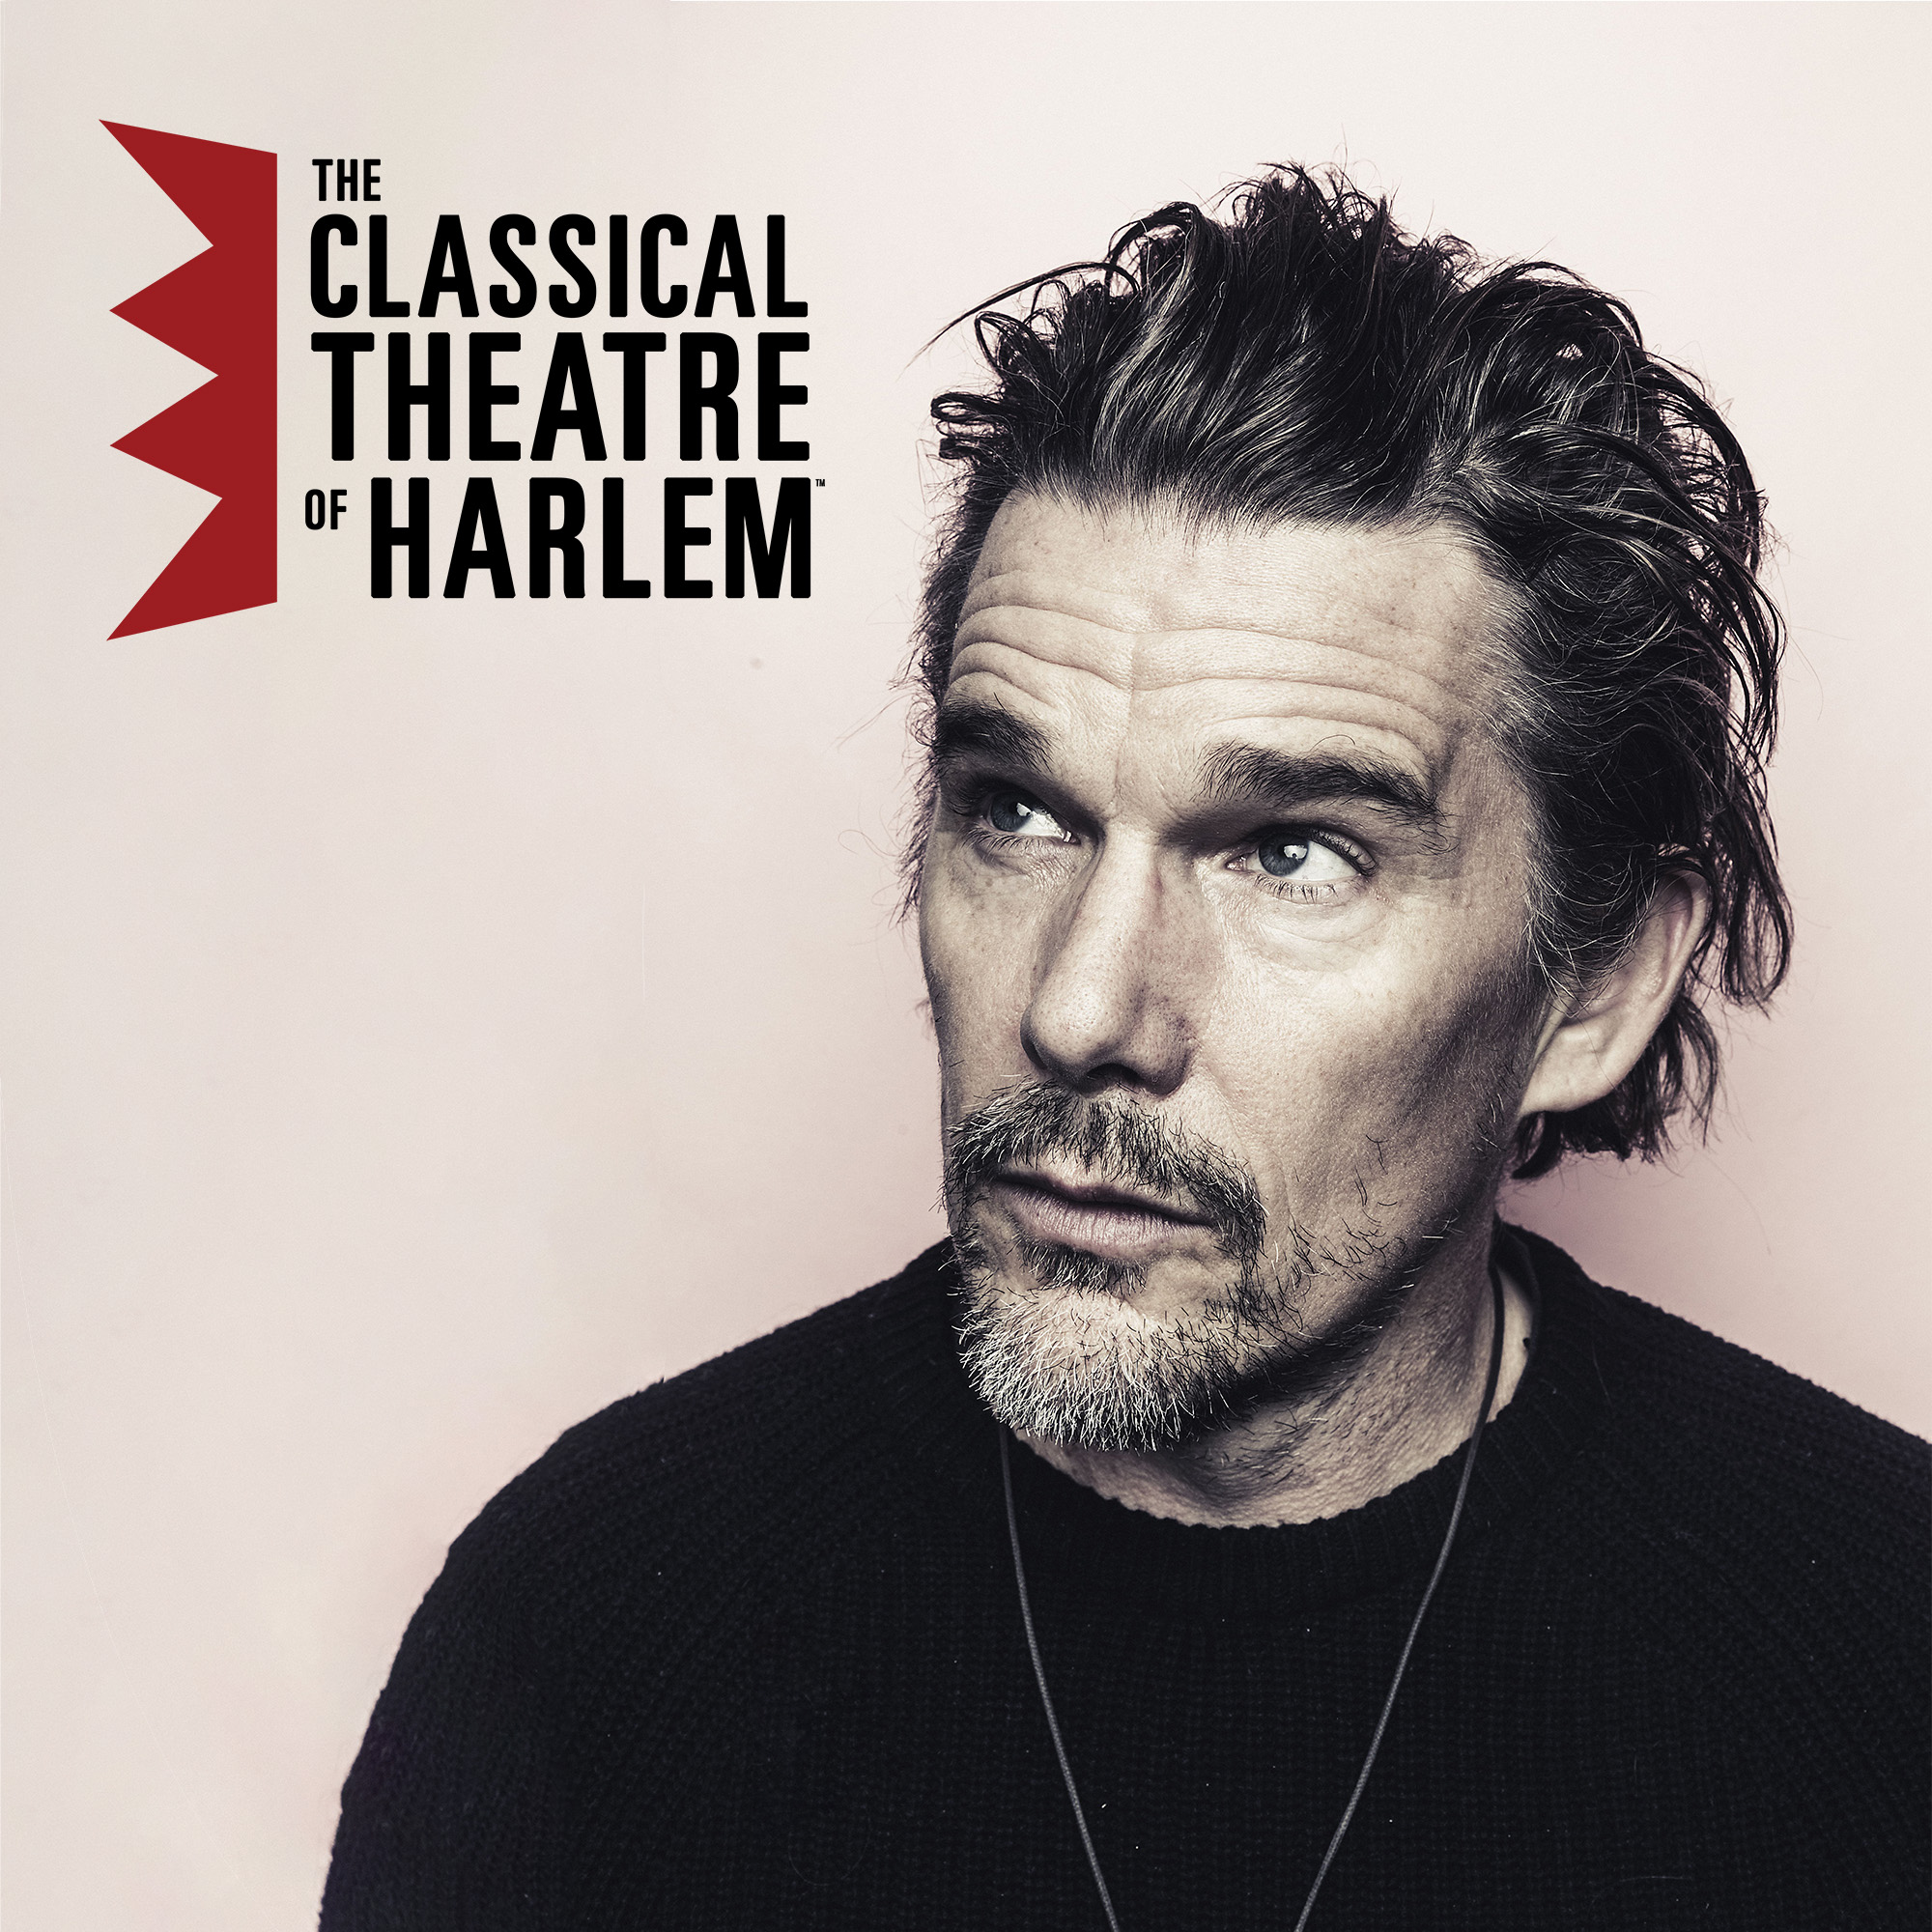 Ethan Hawke joins the board of The Classical Theatre of Harlem